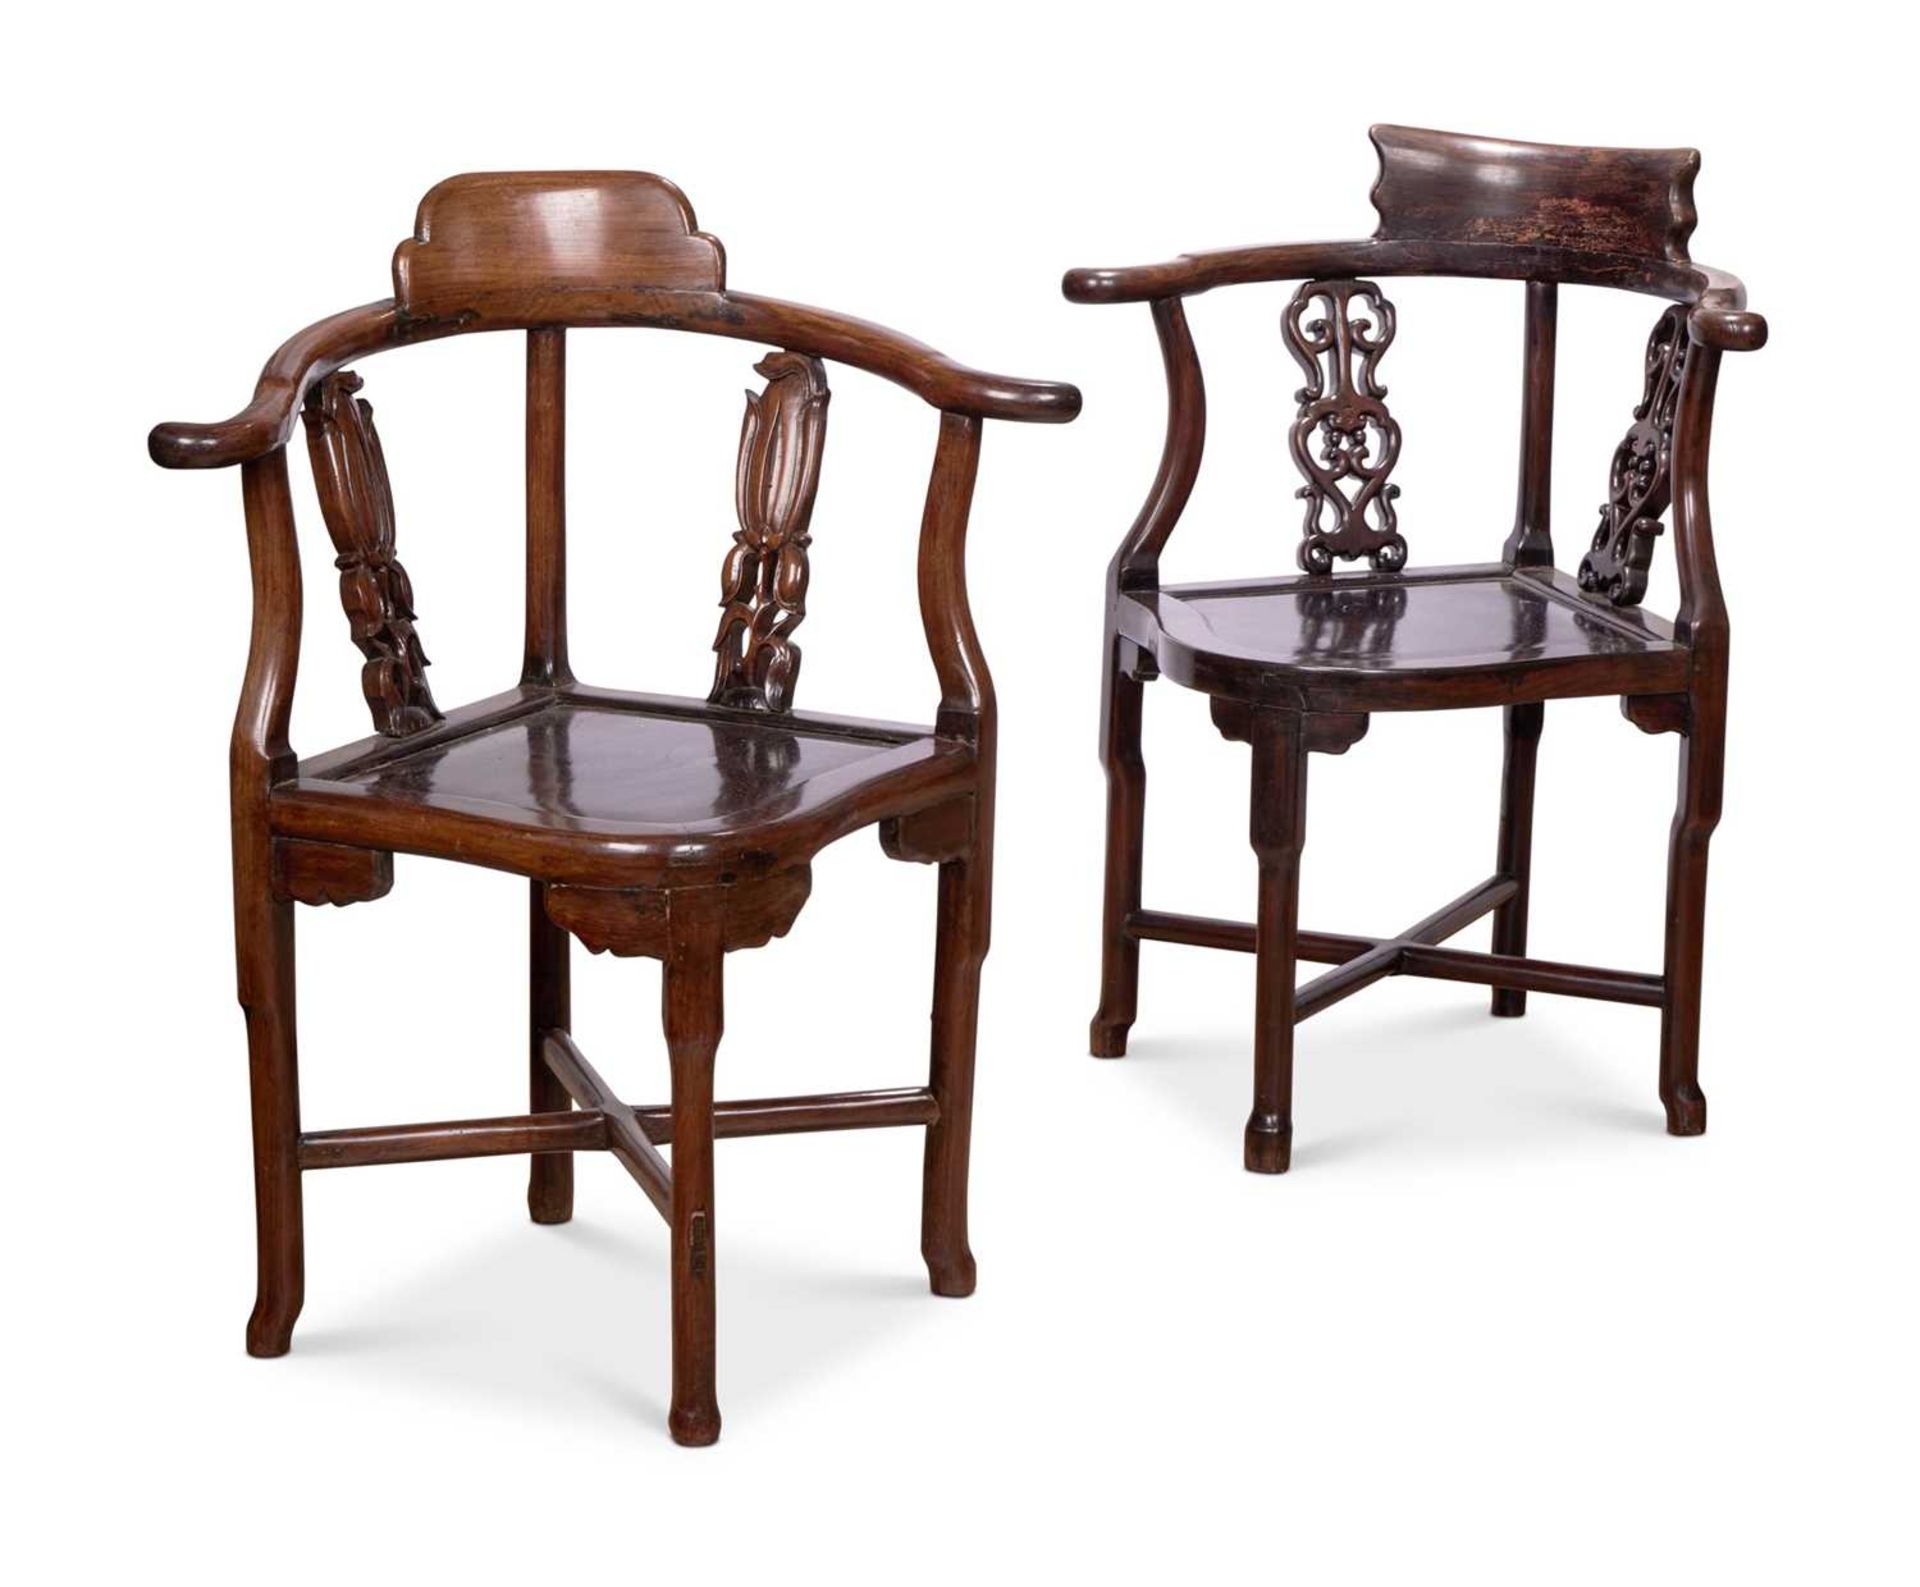 A HARLEQUIN PAIR OF 19TH CENTURY CHINESE HARDWOOD CHAIRS